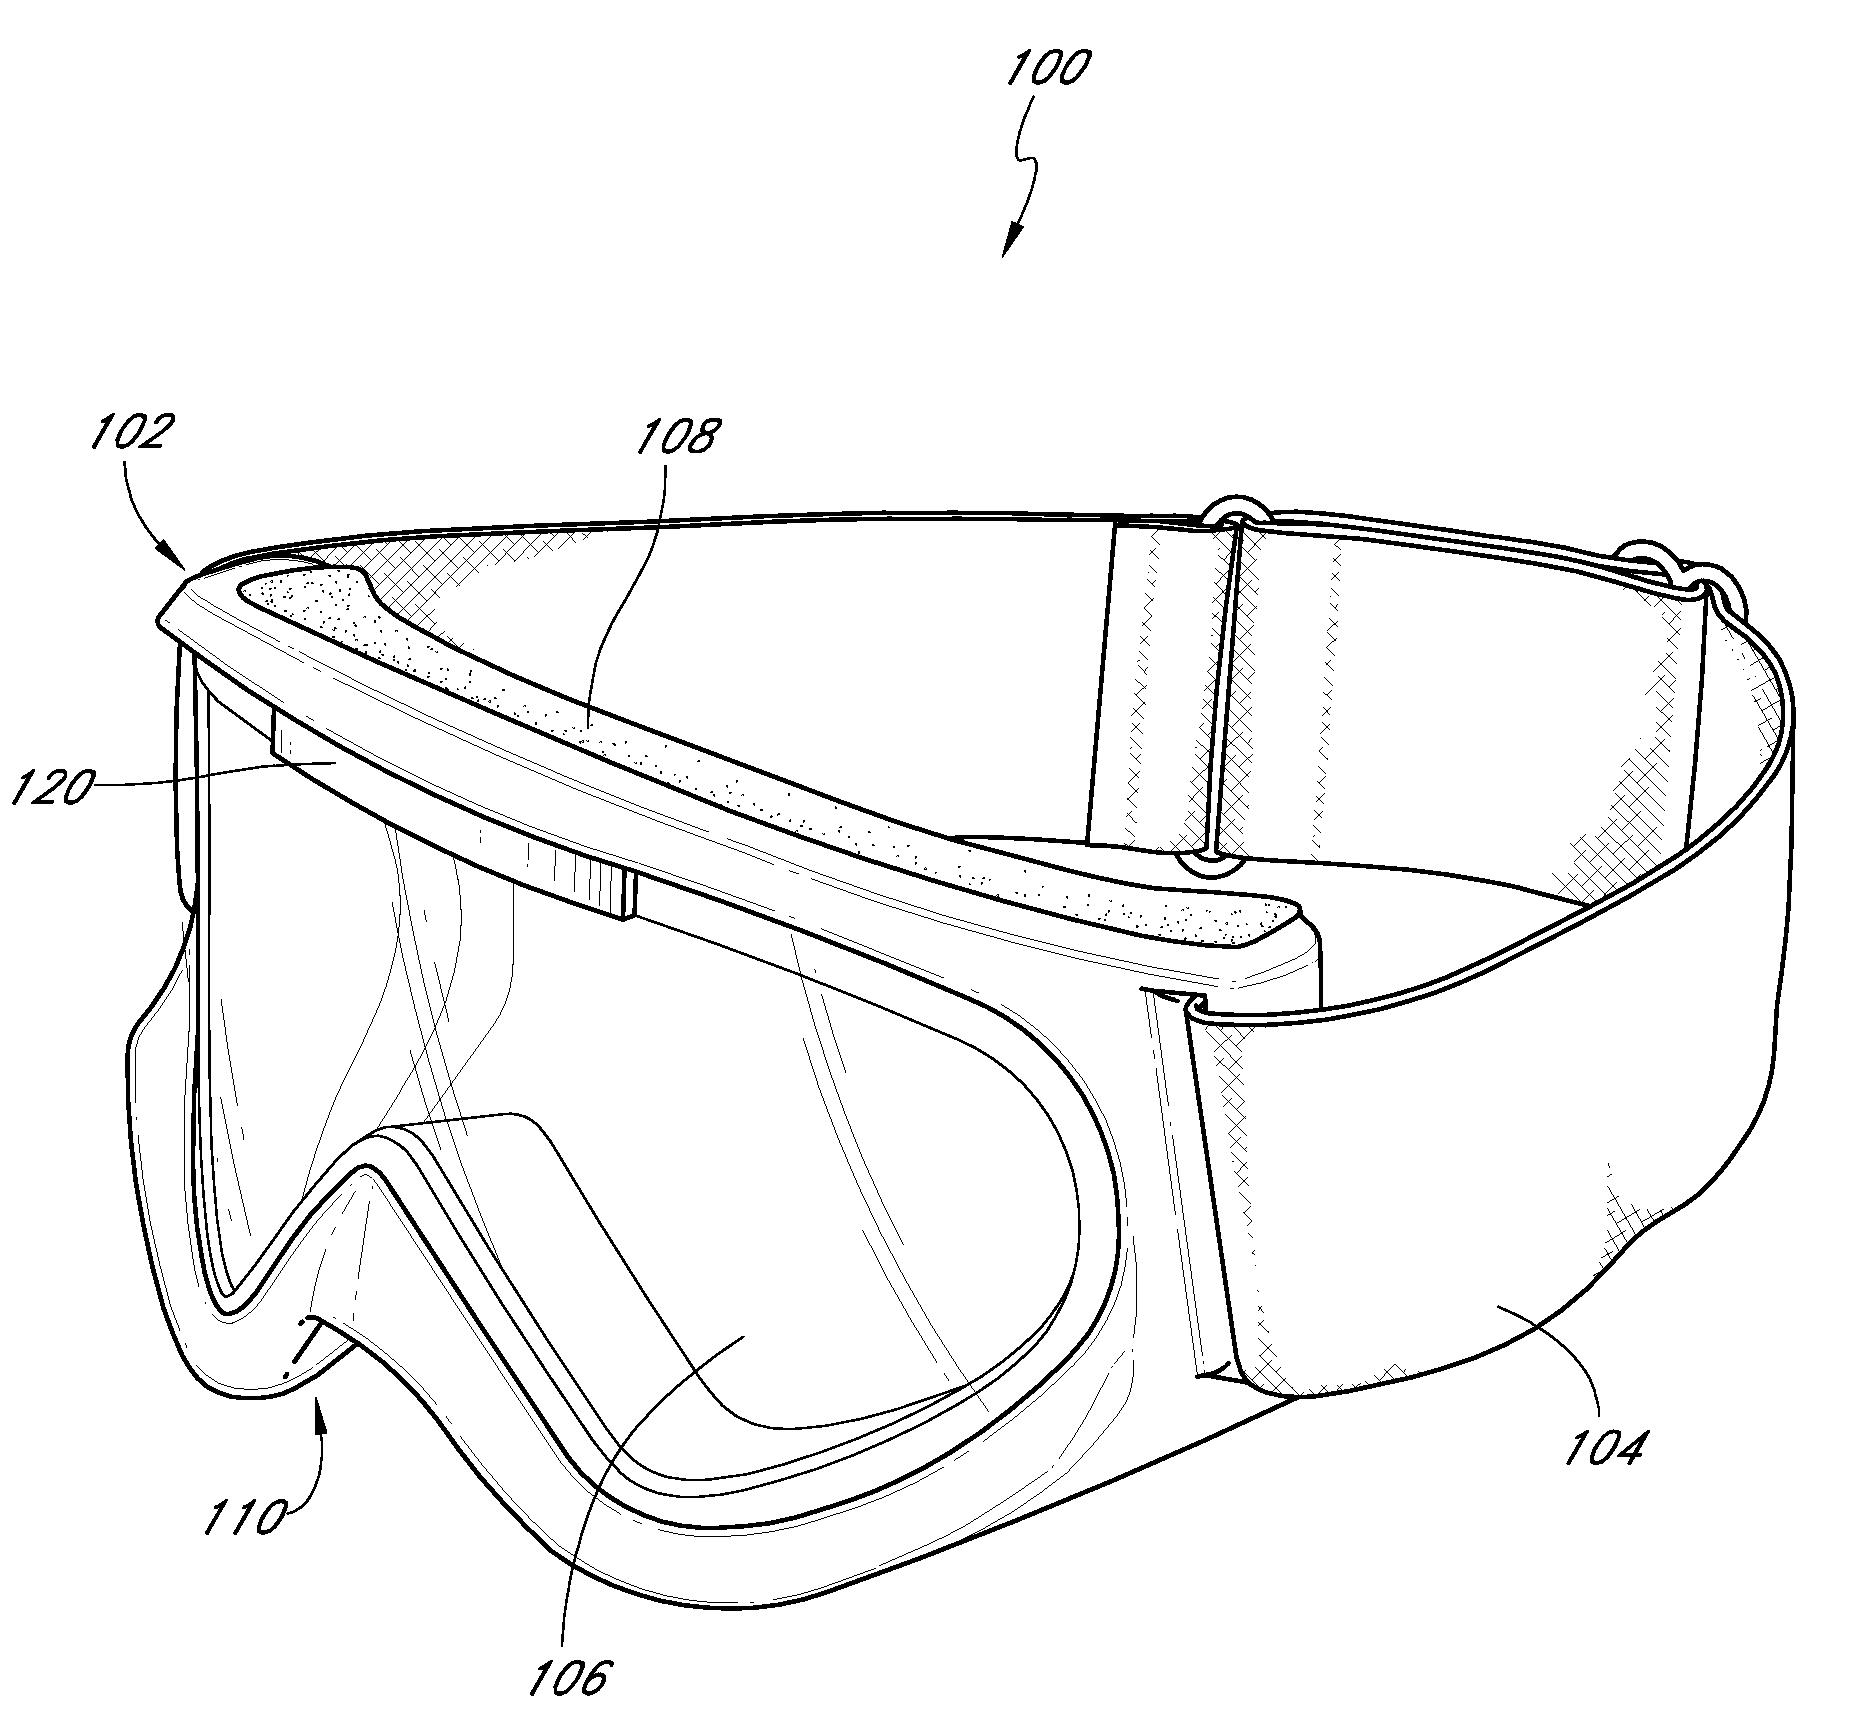 Controlled deflection goggle